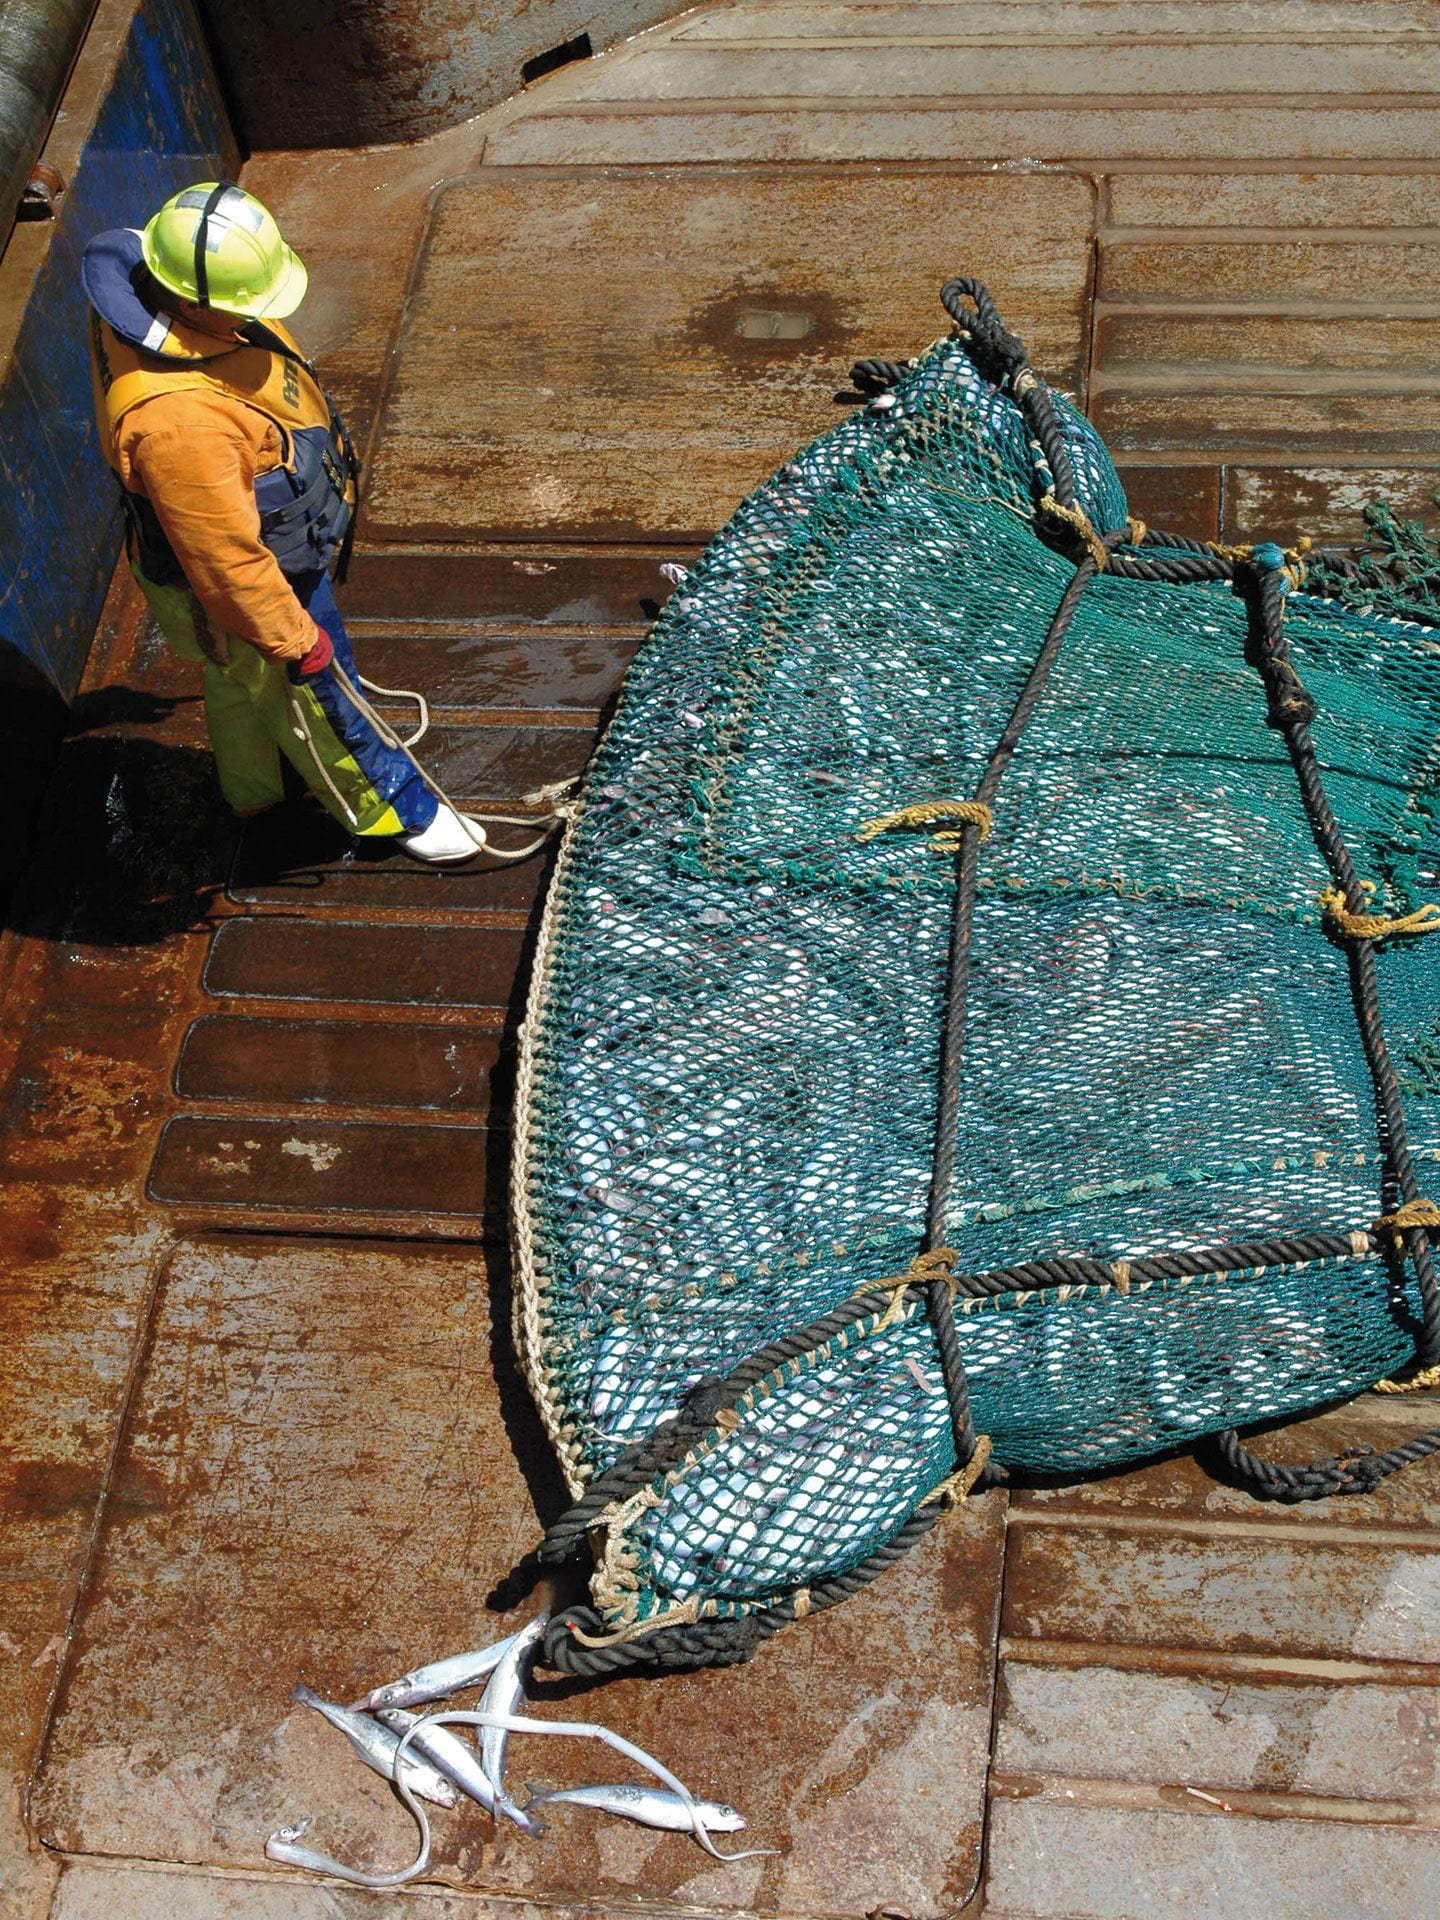 A man stands on the deck of a fishing vessel looking down at a trawl net filled with silvery fish